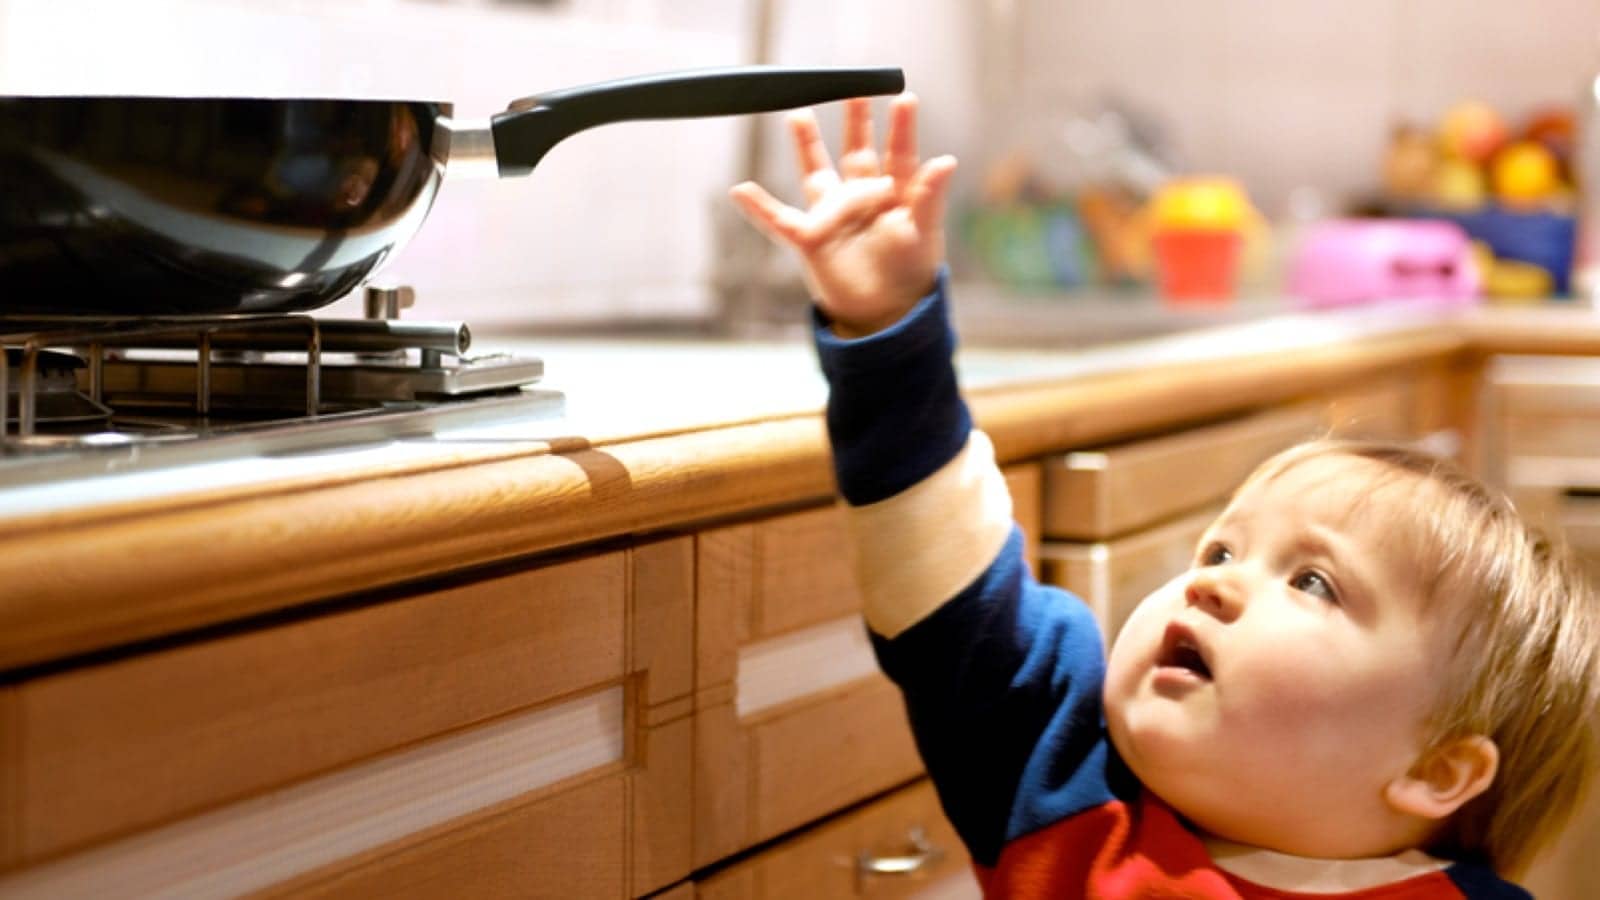 Toddler reaching for the stove